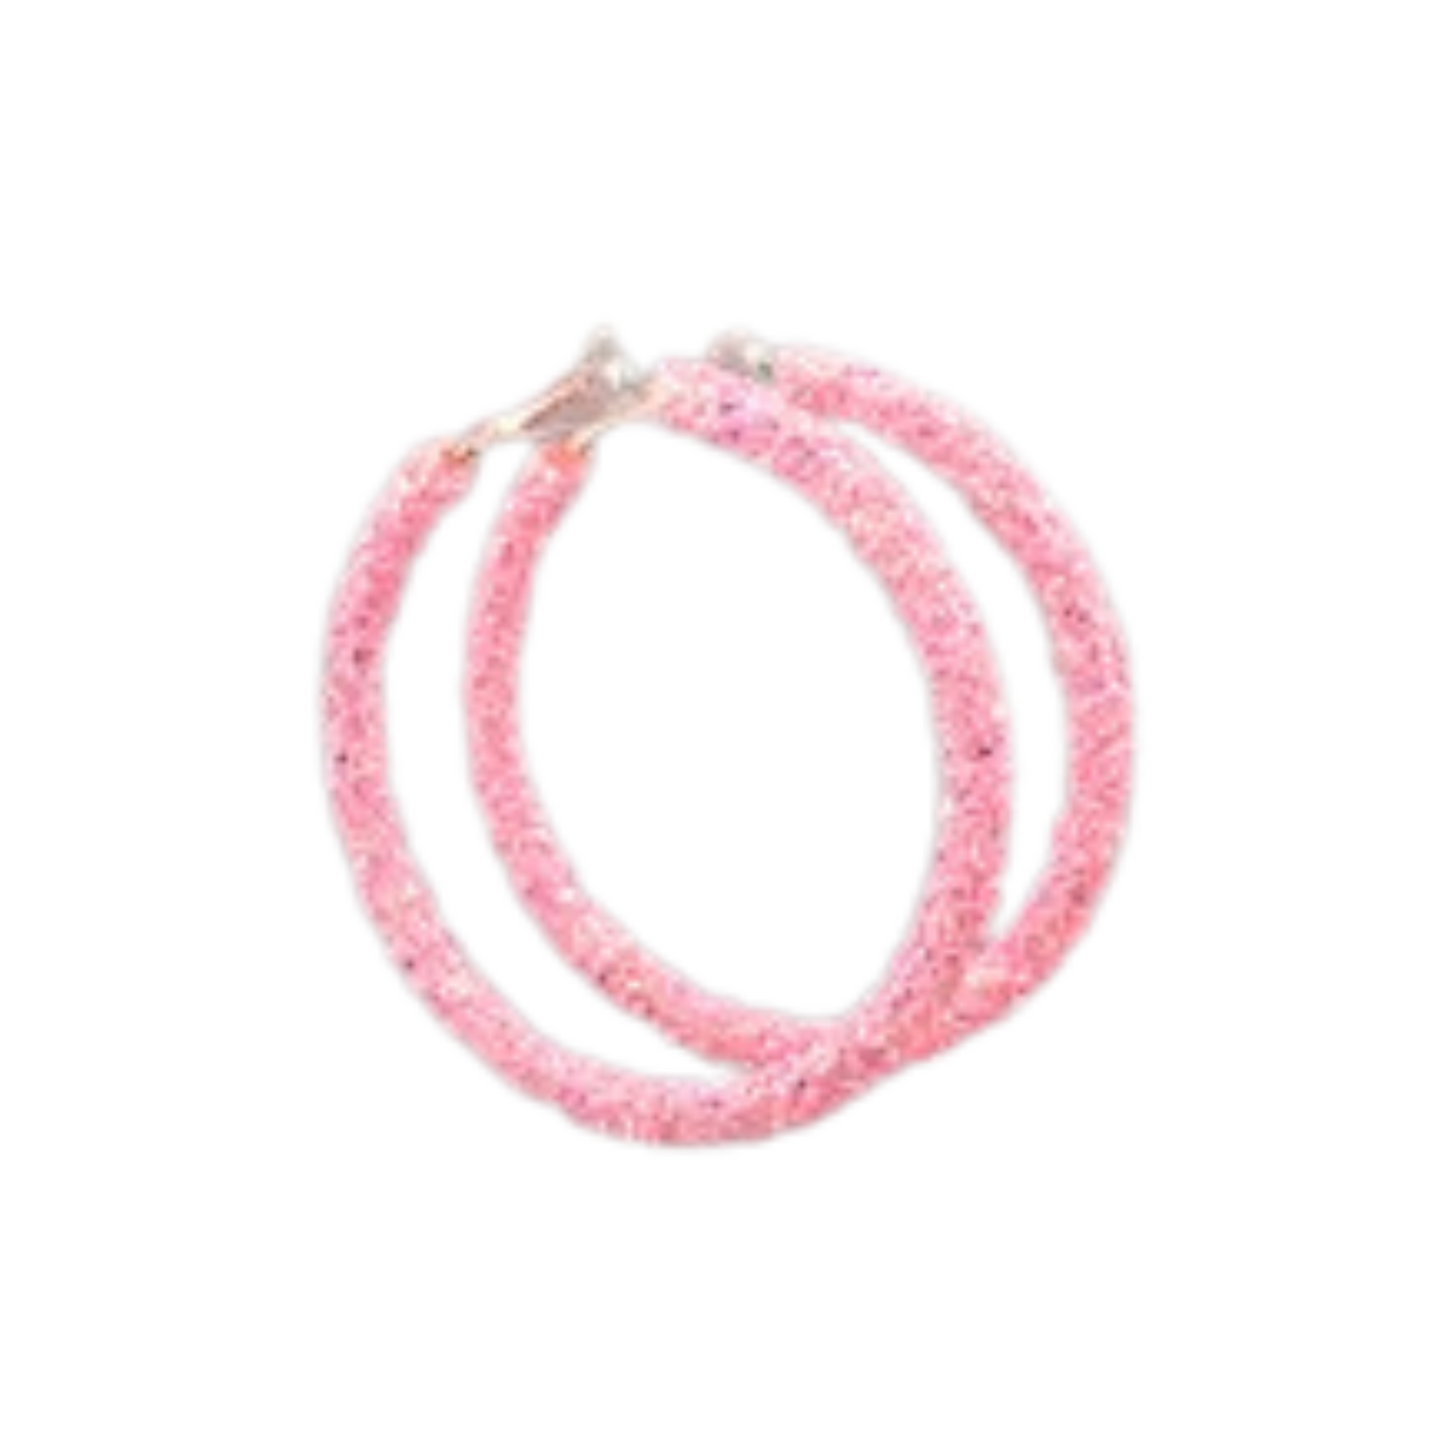 The Large Crystal Cluster Hoops are perfect for any occasion. These lightweight earrings feature iconic crystal cluster accents in three colors: white, yellow, and pink. For a timeless and elegant look, these are sure to make a statement.